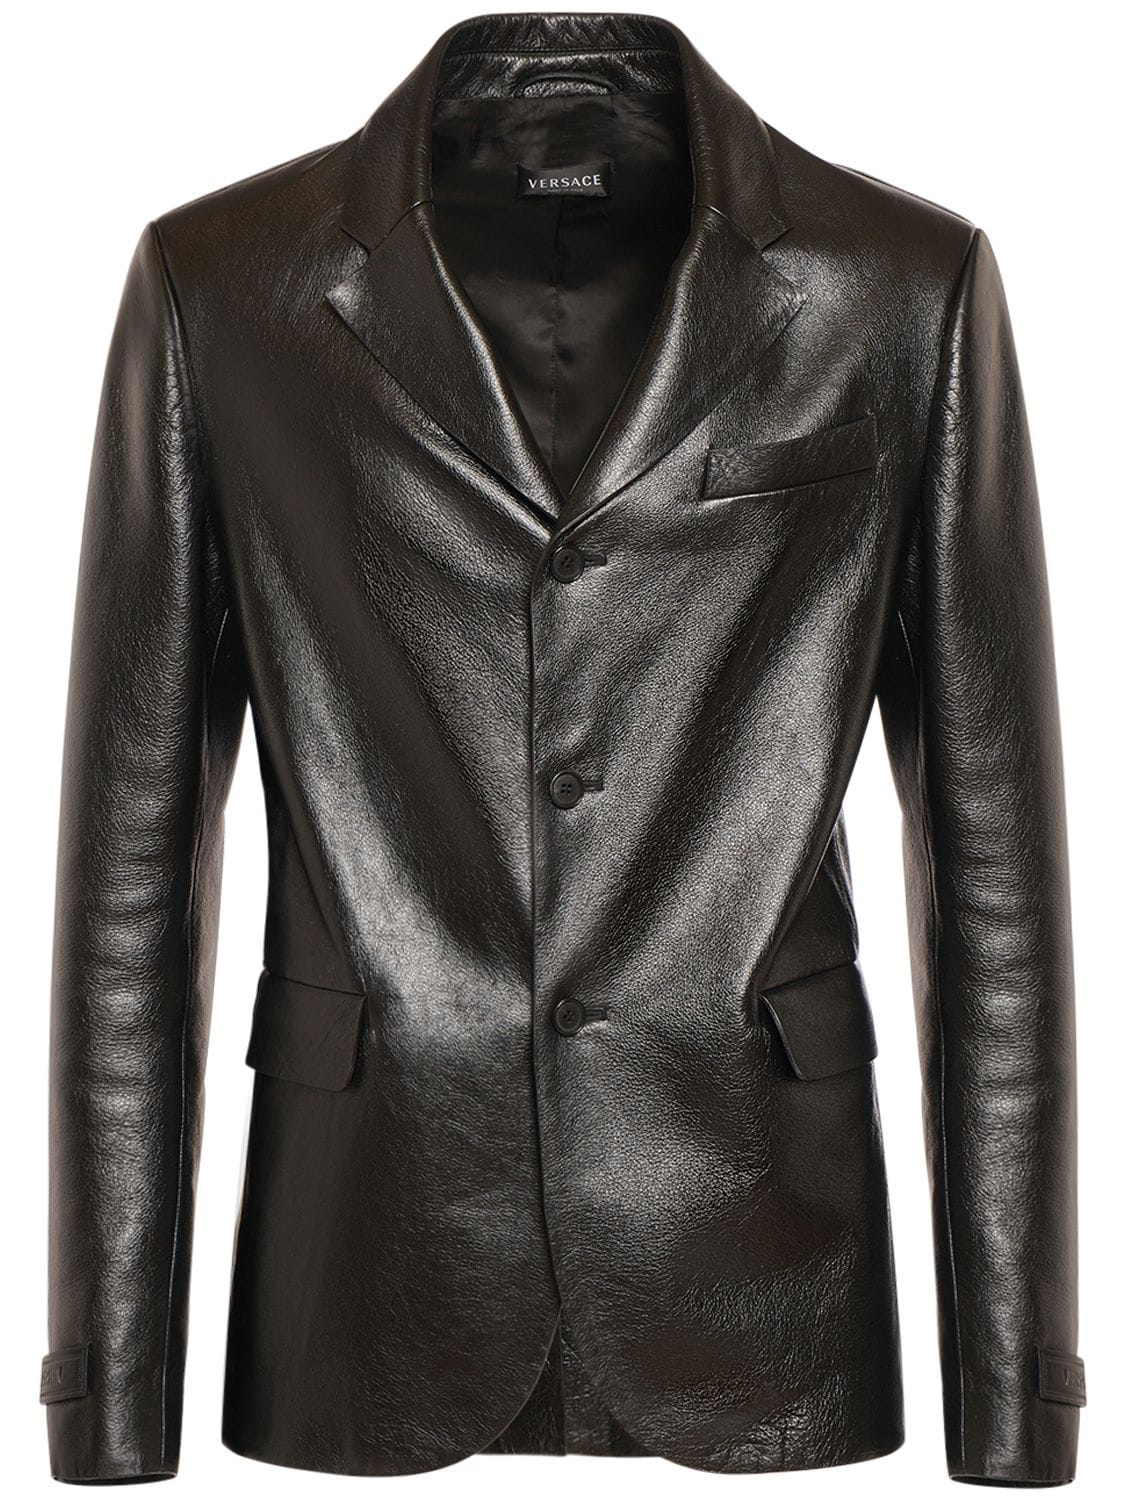 VERSACE SINGLE BREASTED LEATHER JACKET